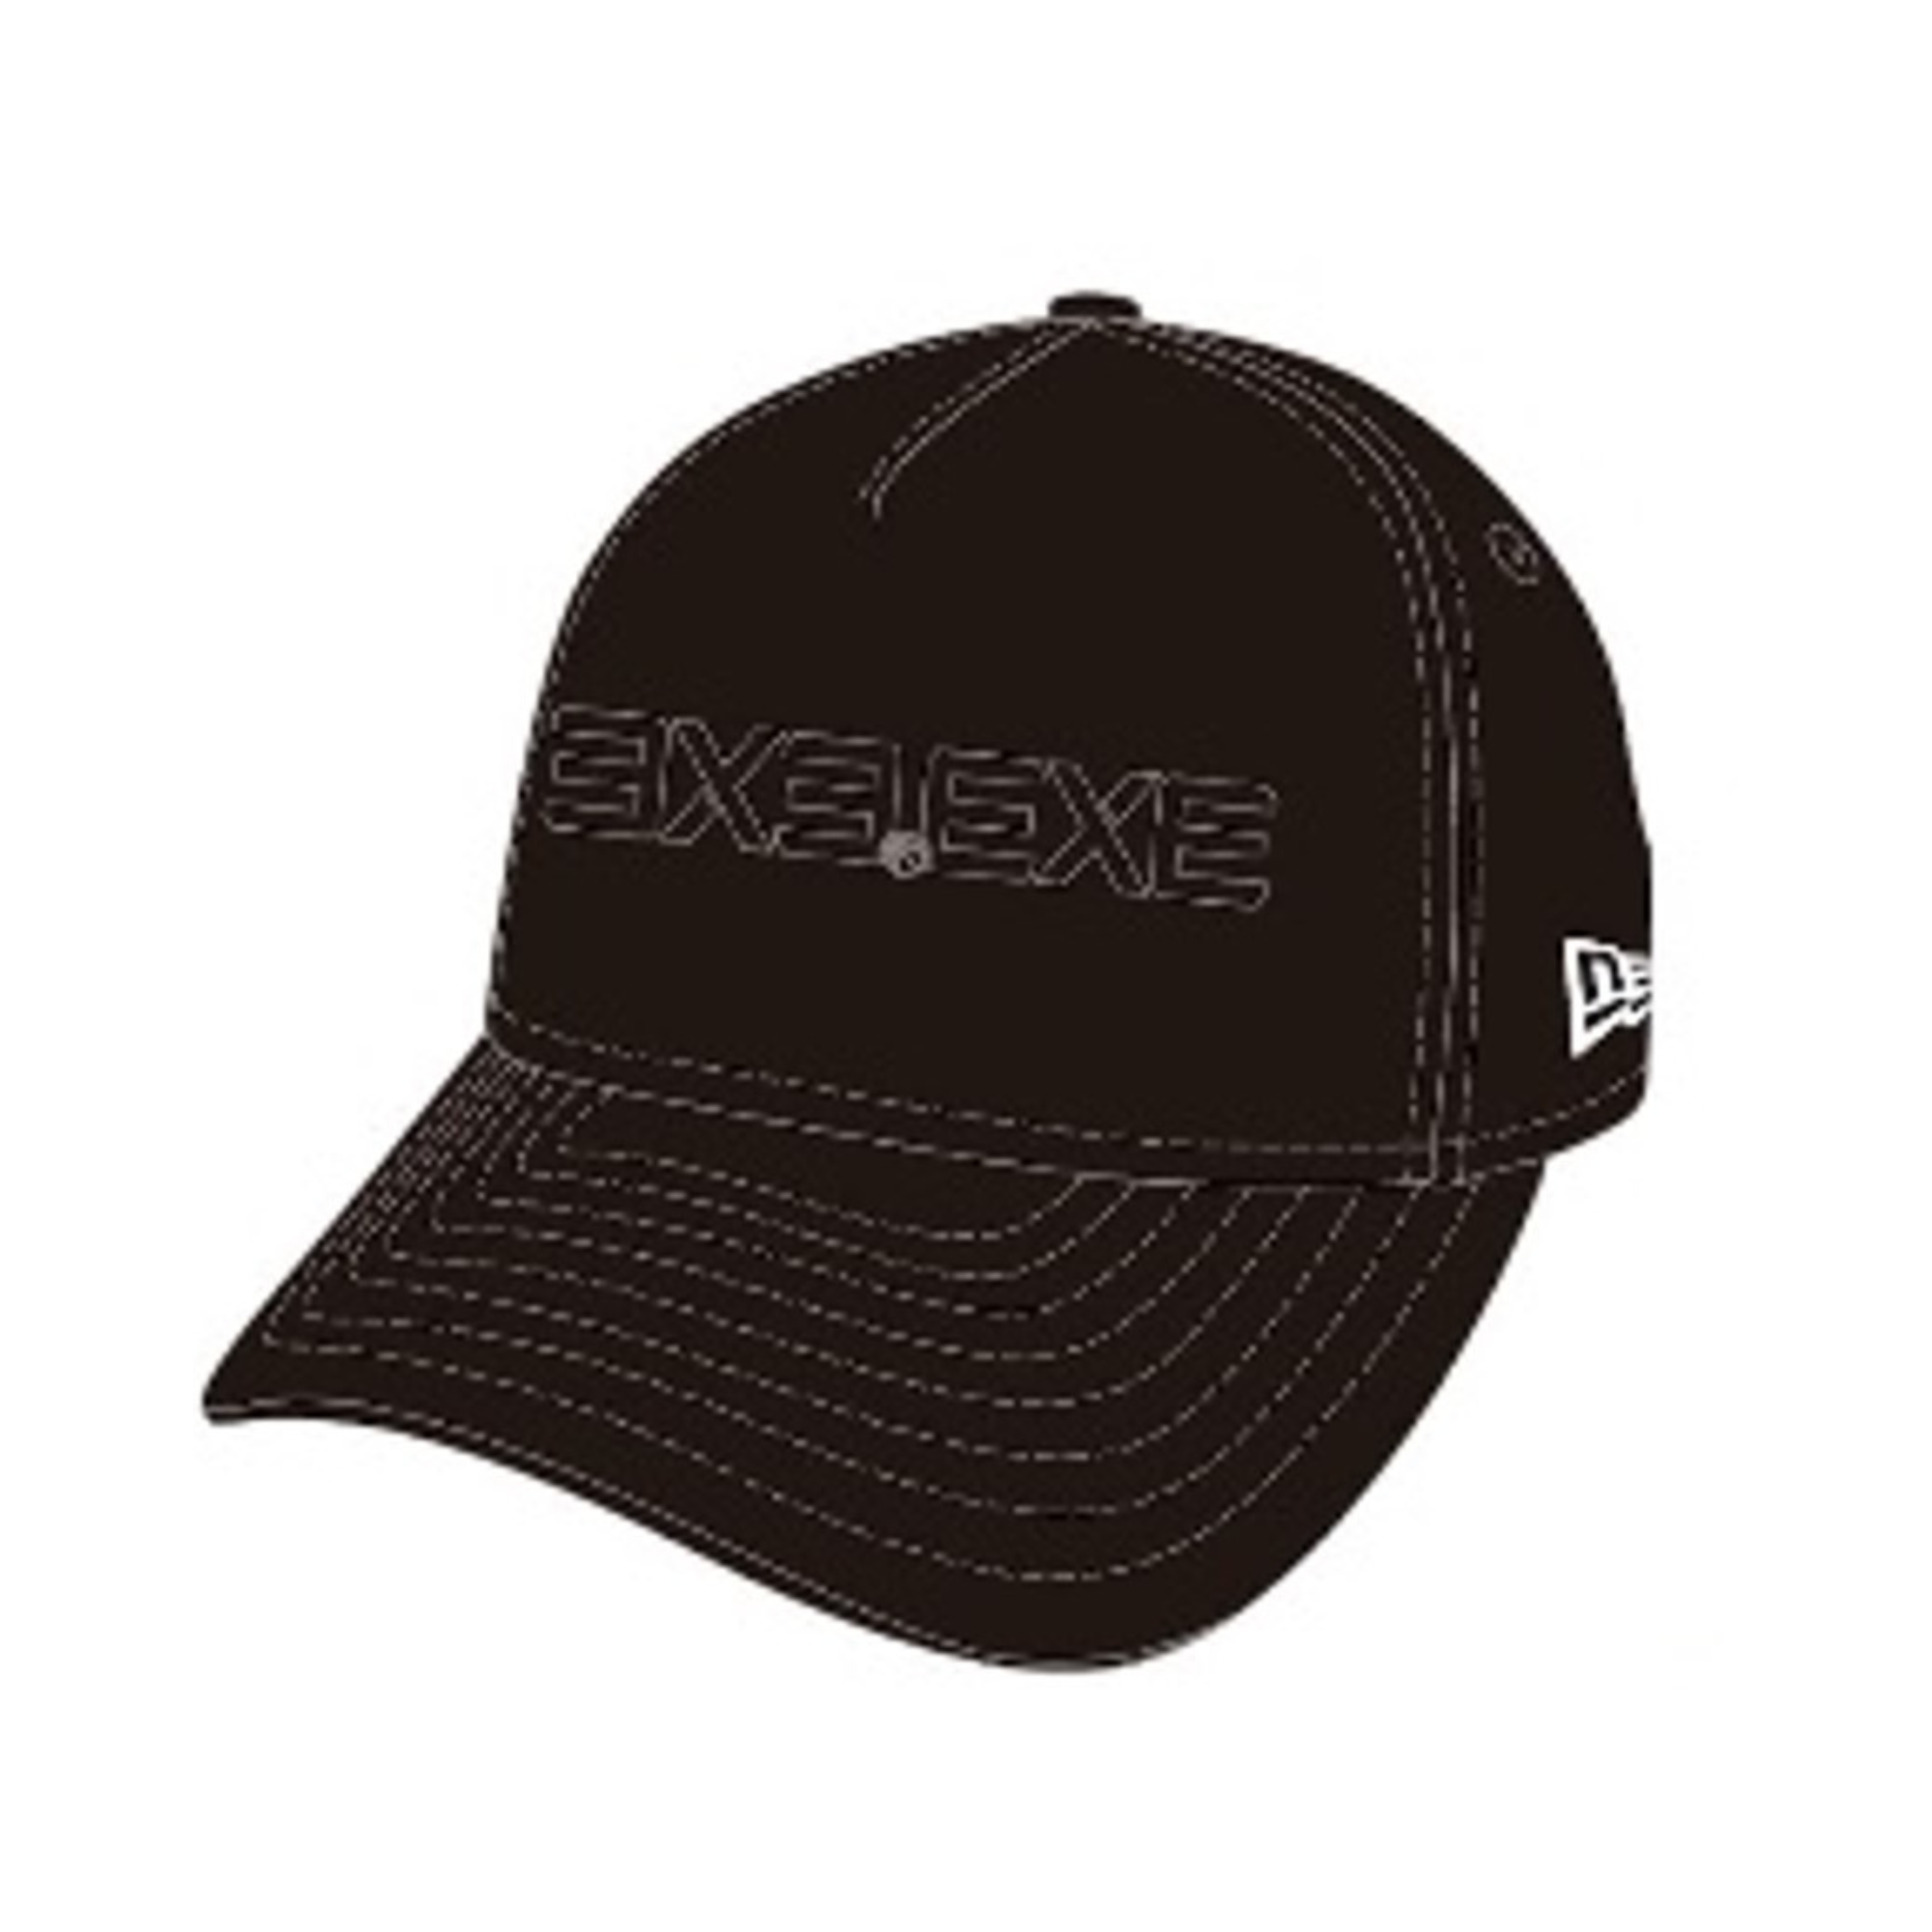 3x3.EXE CAP／NEWERA 9FORTY™ A-Frame